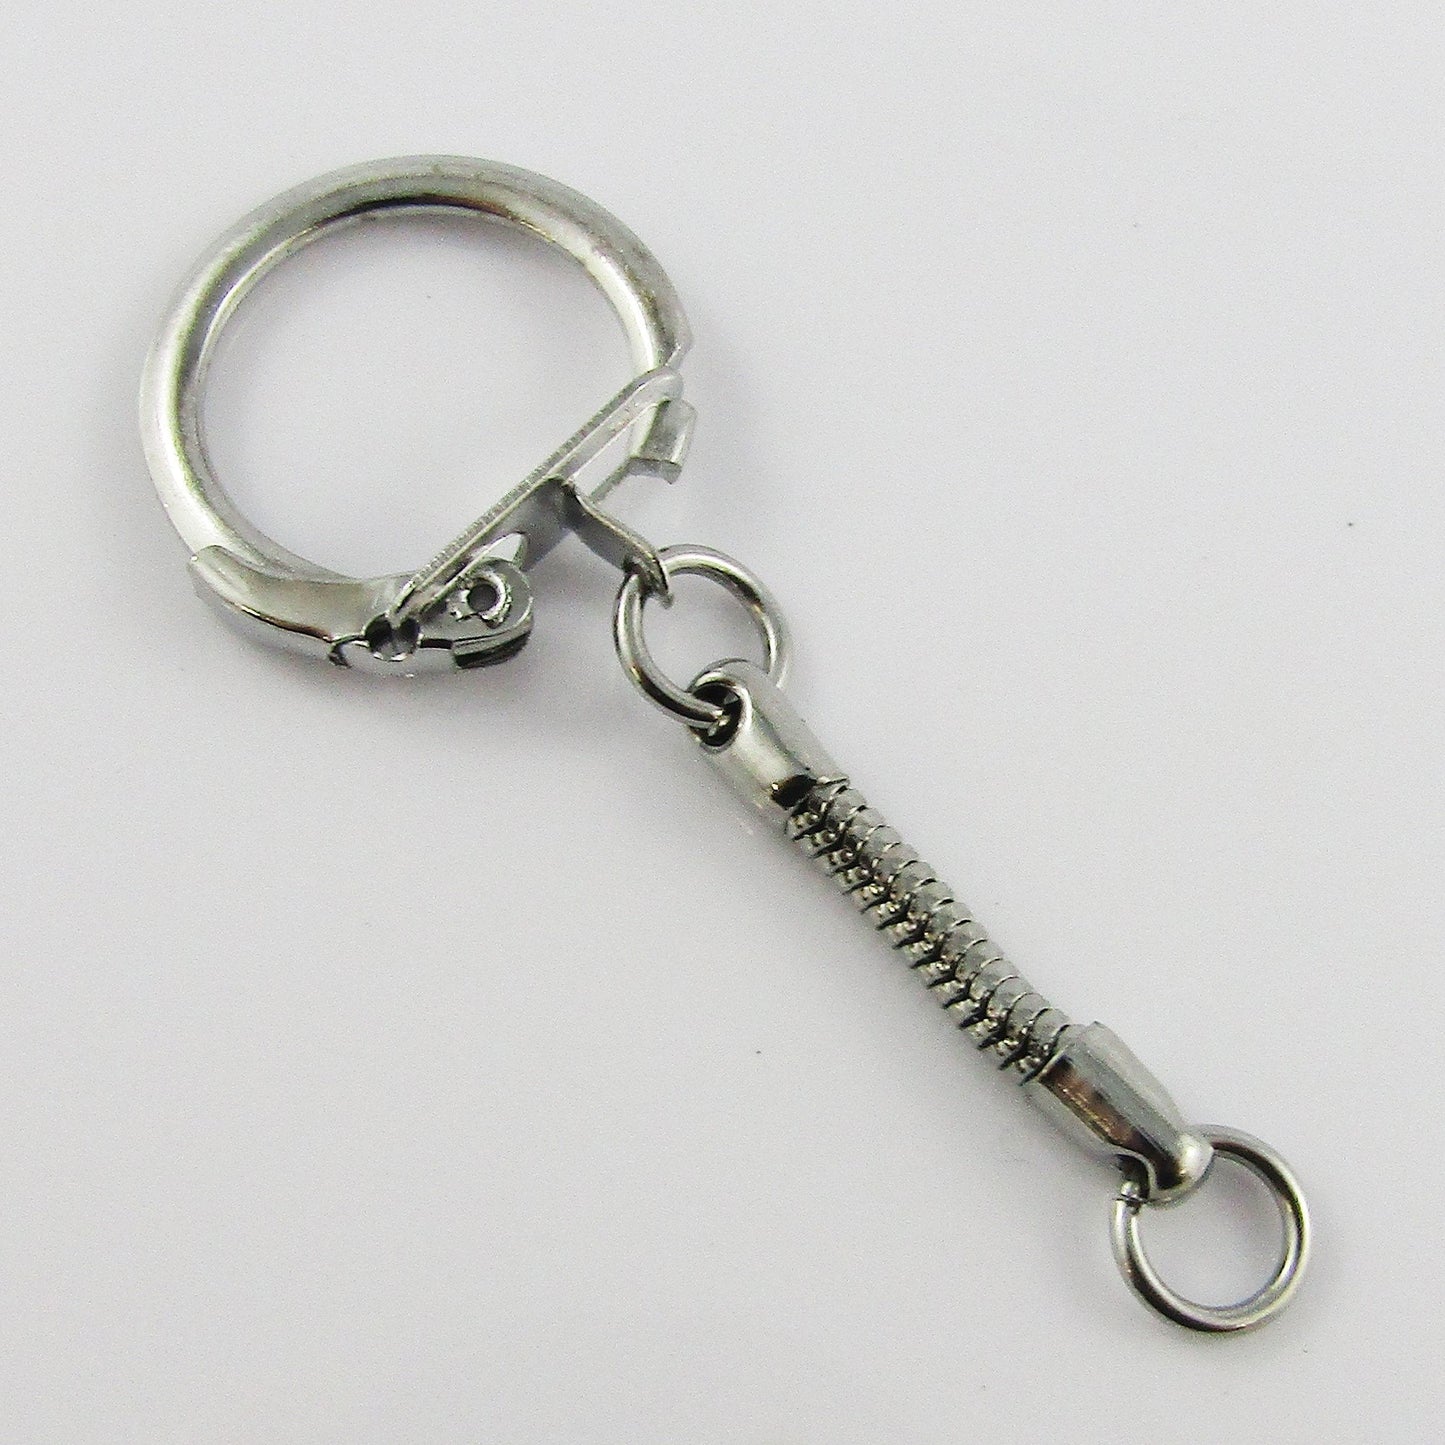 Bulk x10 C Clip Clasp with Snake Chain Key Ring Keychain Finding 60mm Silver